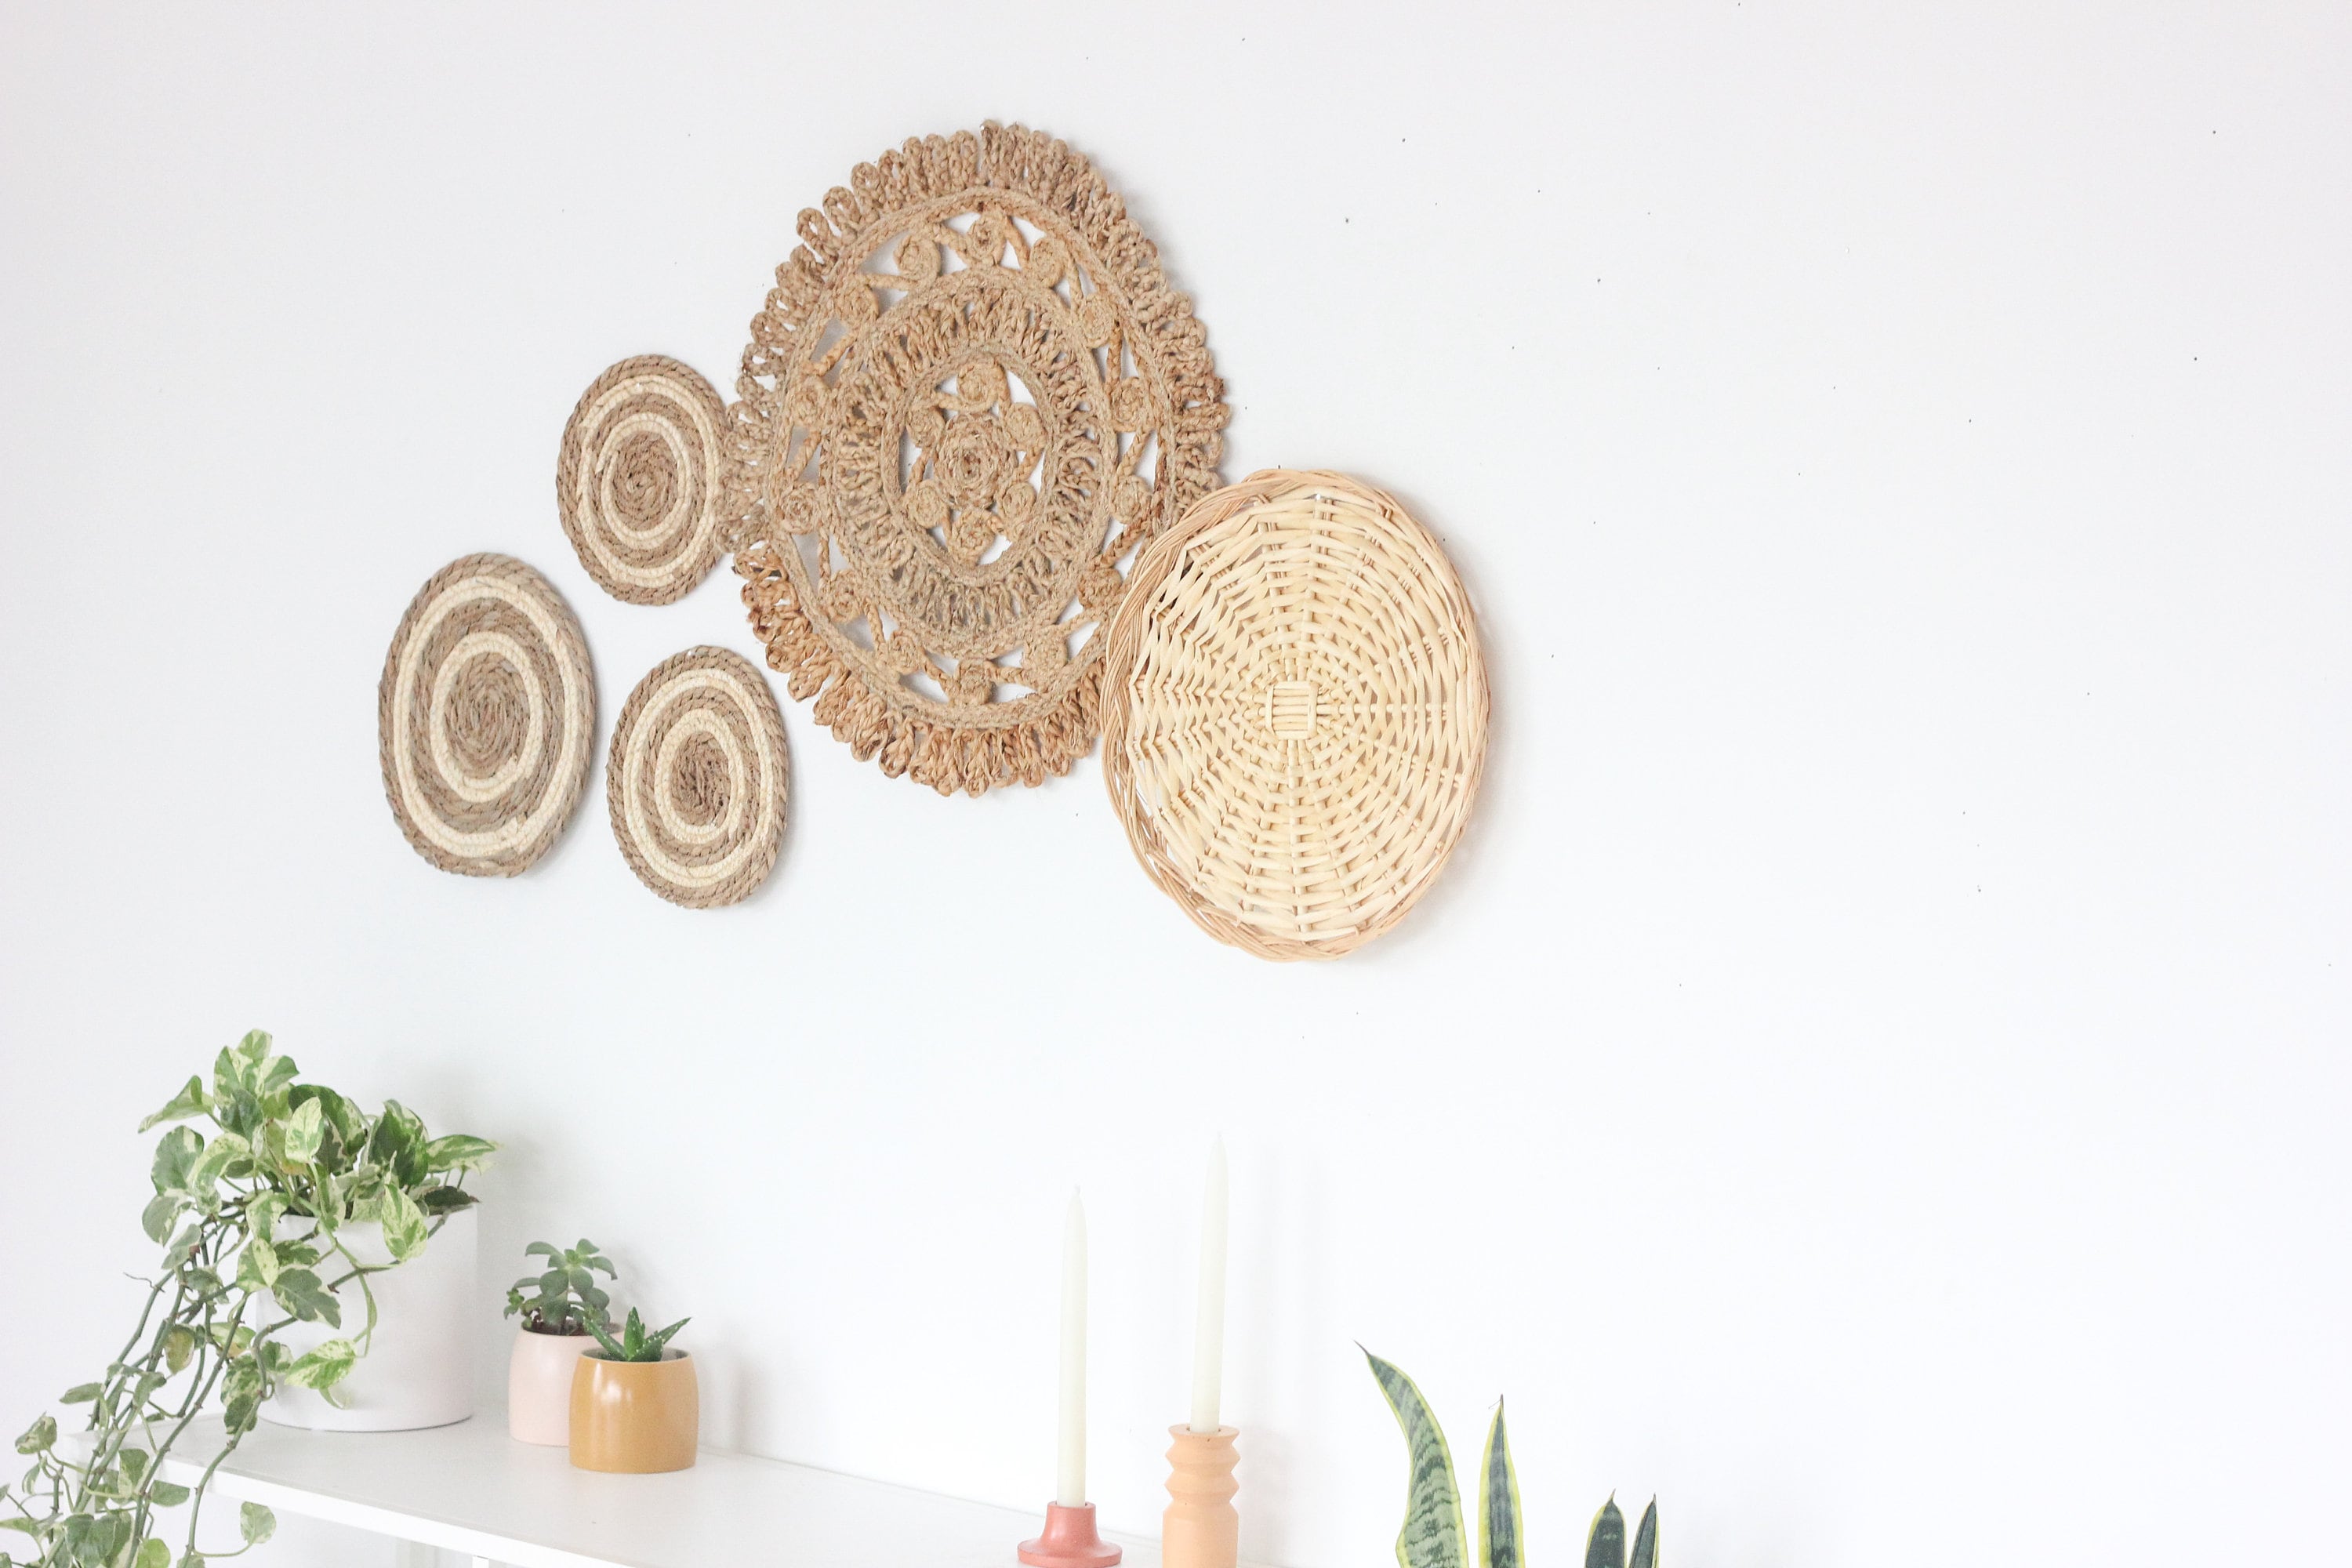 Sunset Wall Hanging Mix Curated Wall Baskets Set